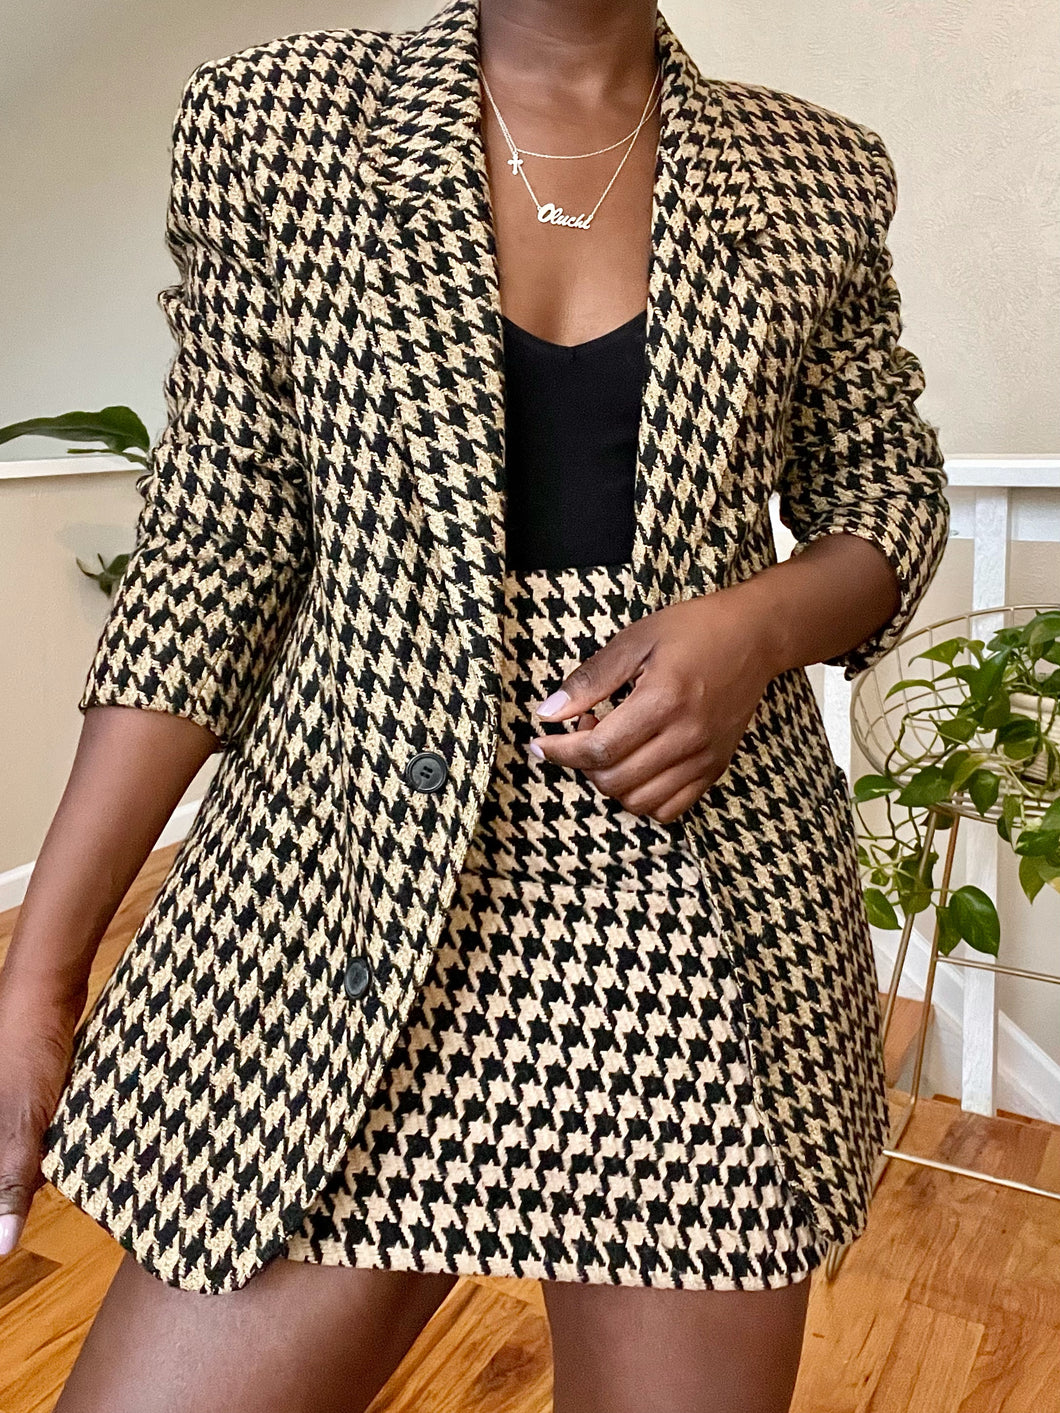 toffee houndstooth skirt suit